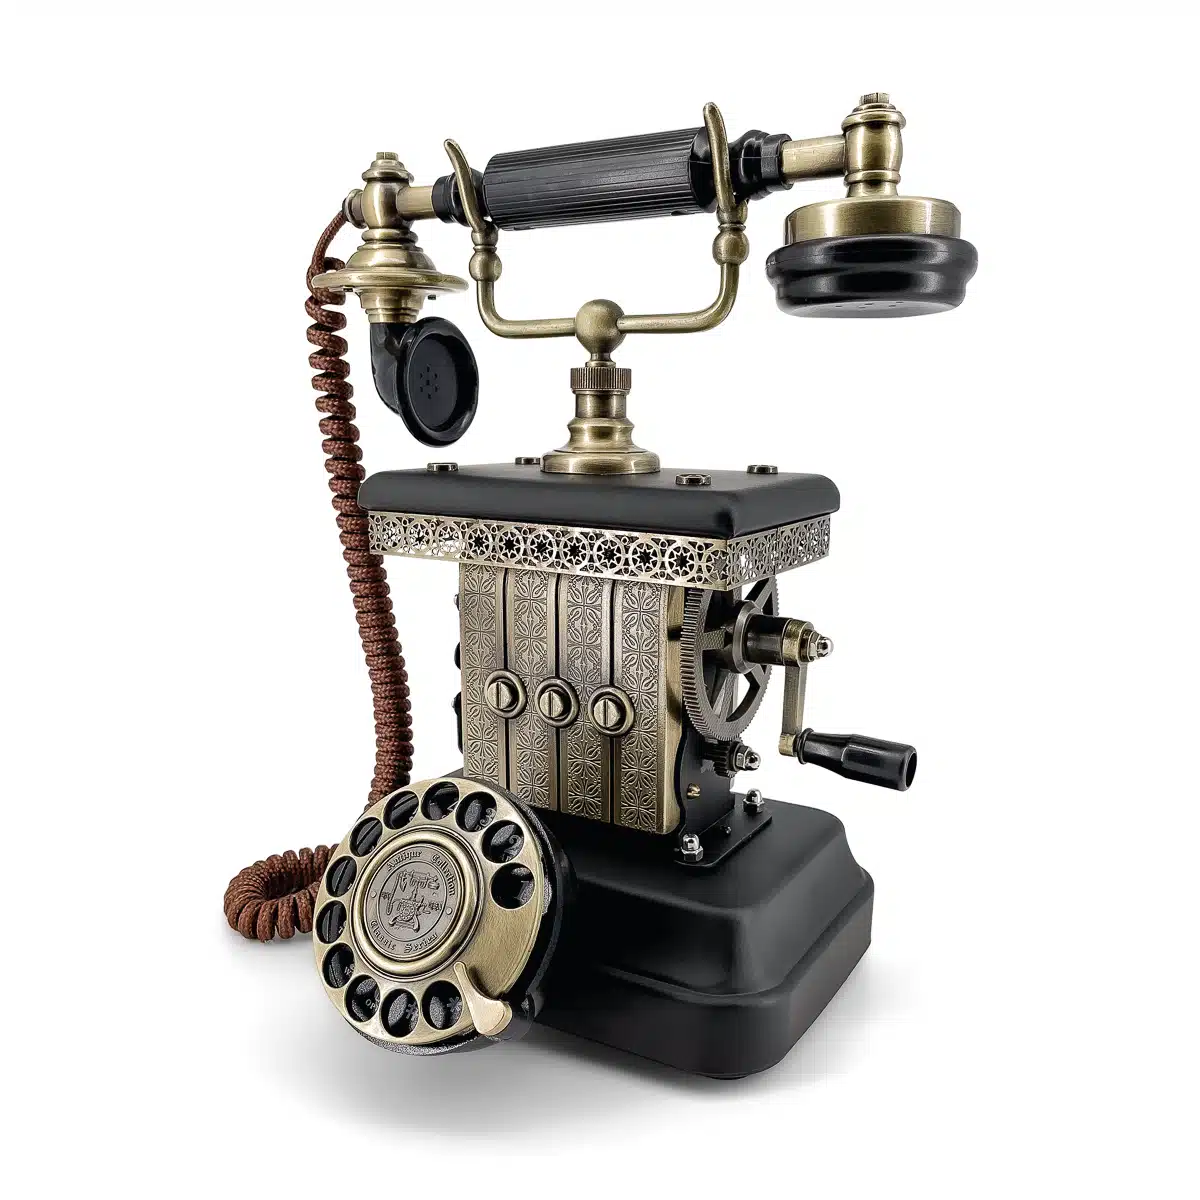 The Steampunk Brass Rotary Phone Audio Guest Book